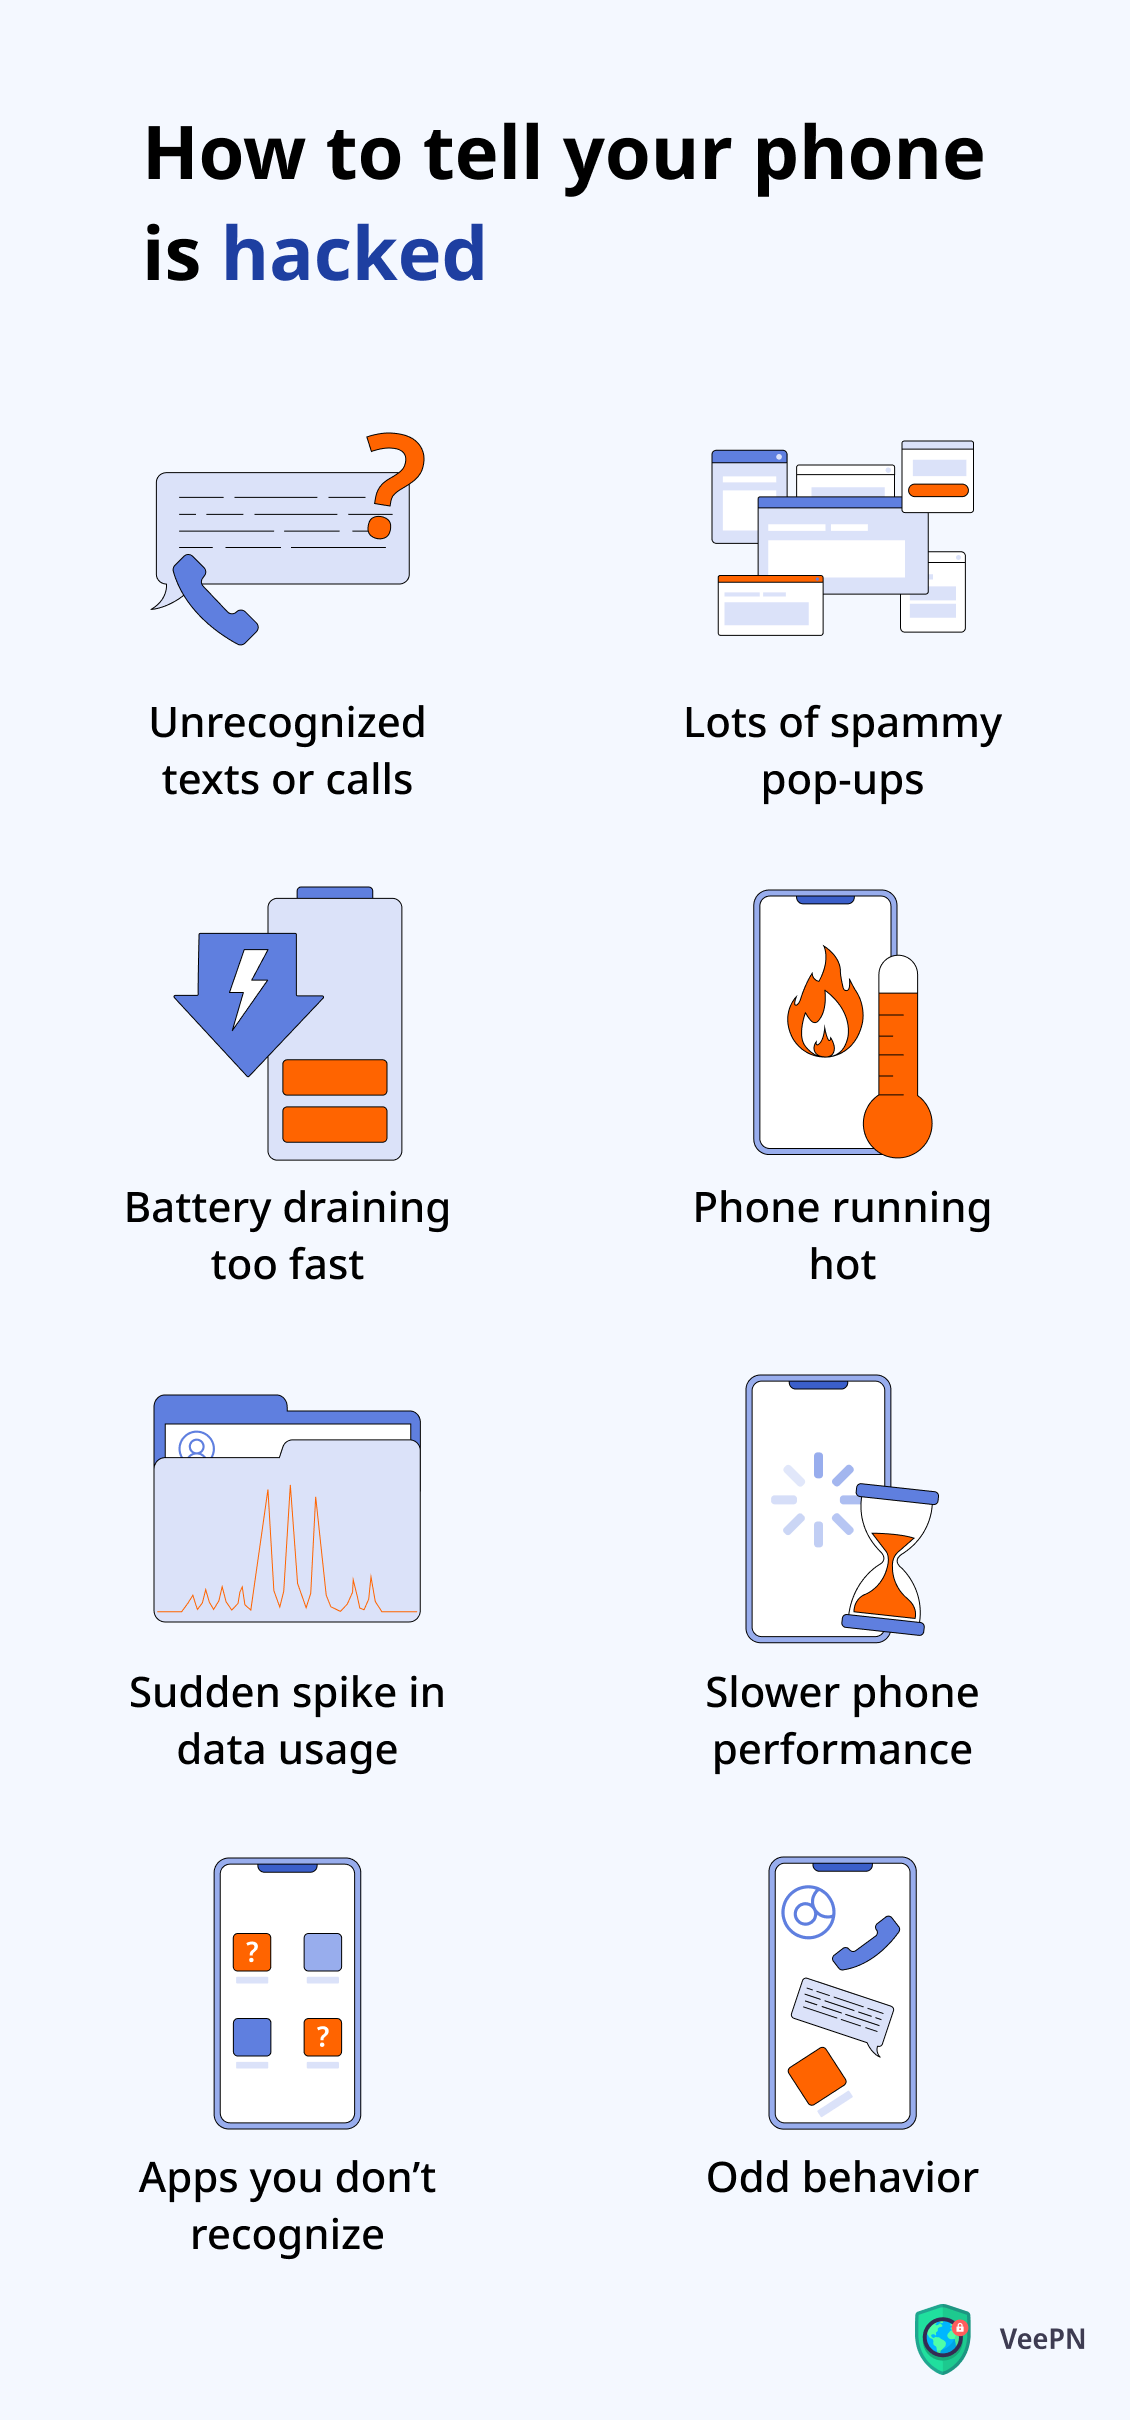 How to tell your phone is hacked